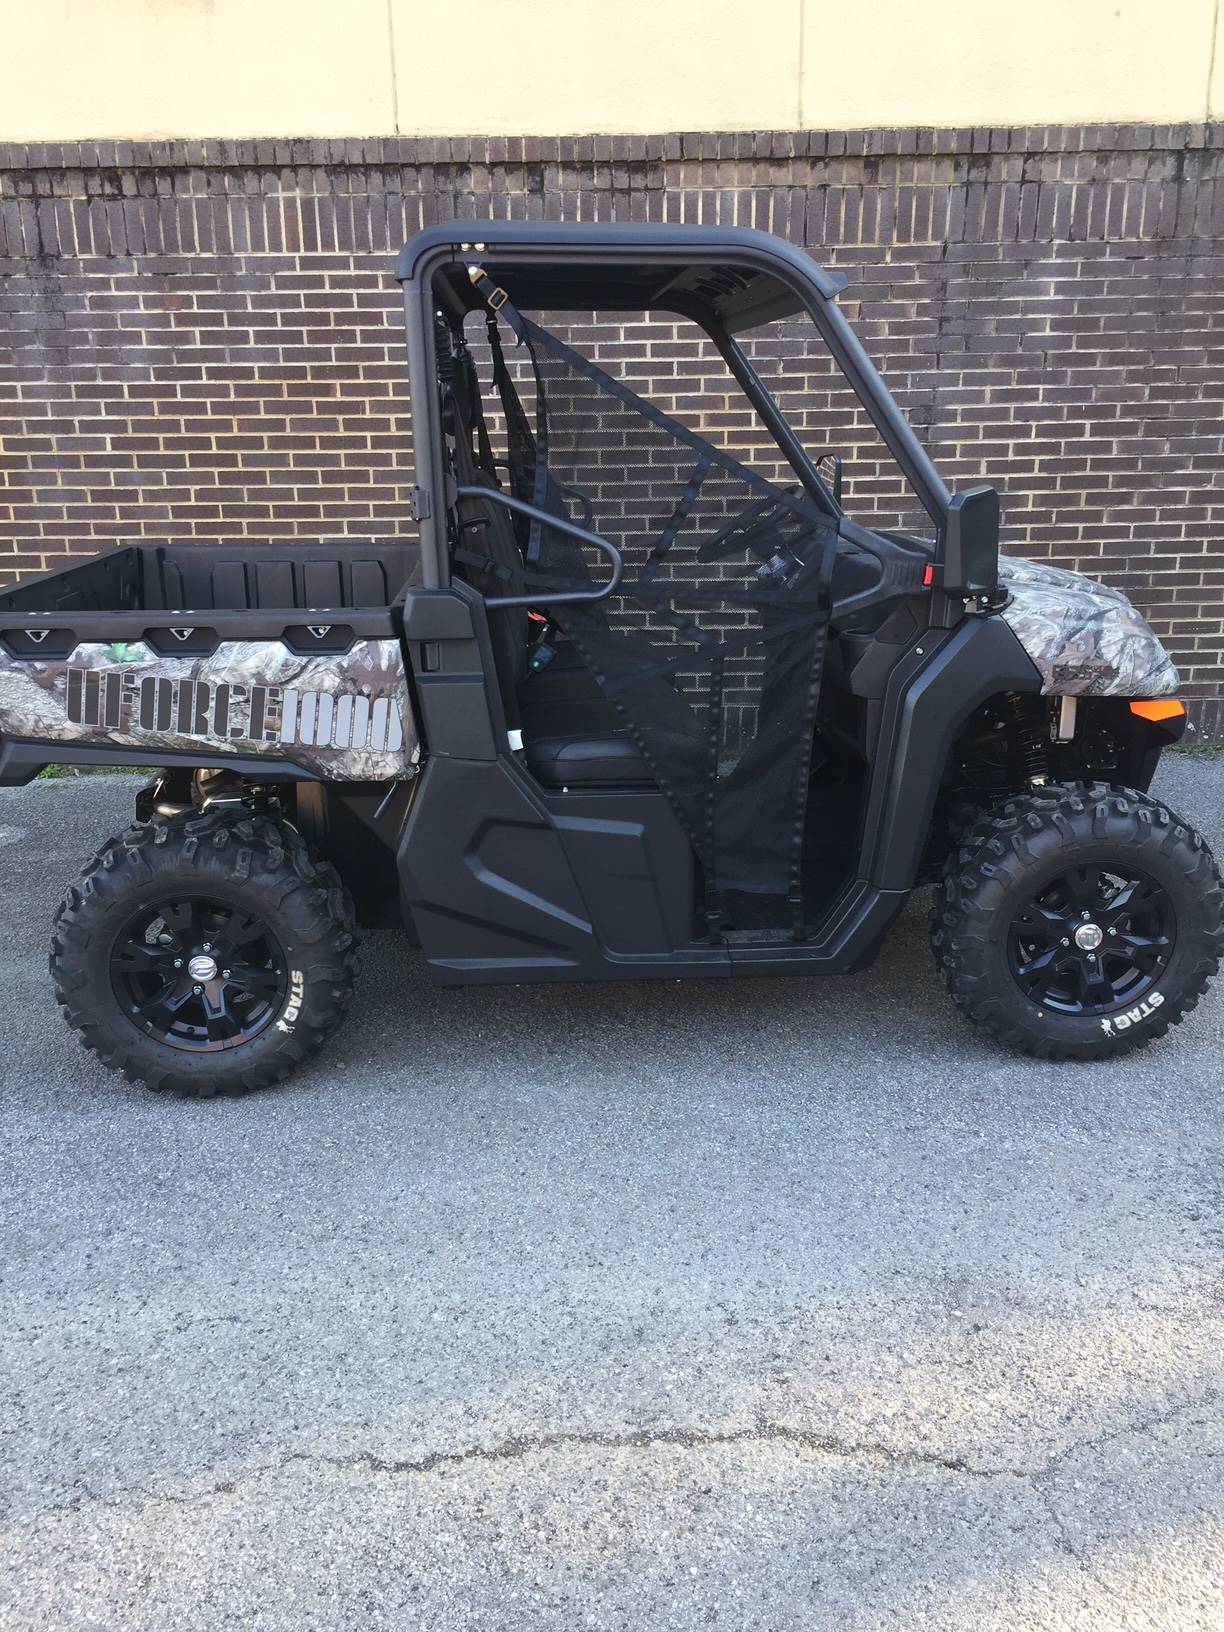 Uforce 1000 For Sale Knoxville Tn